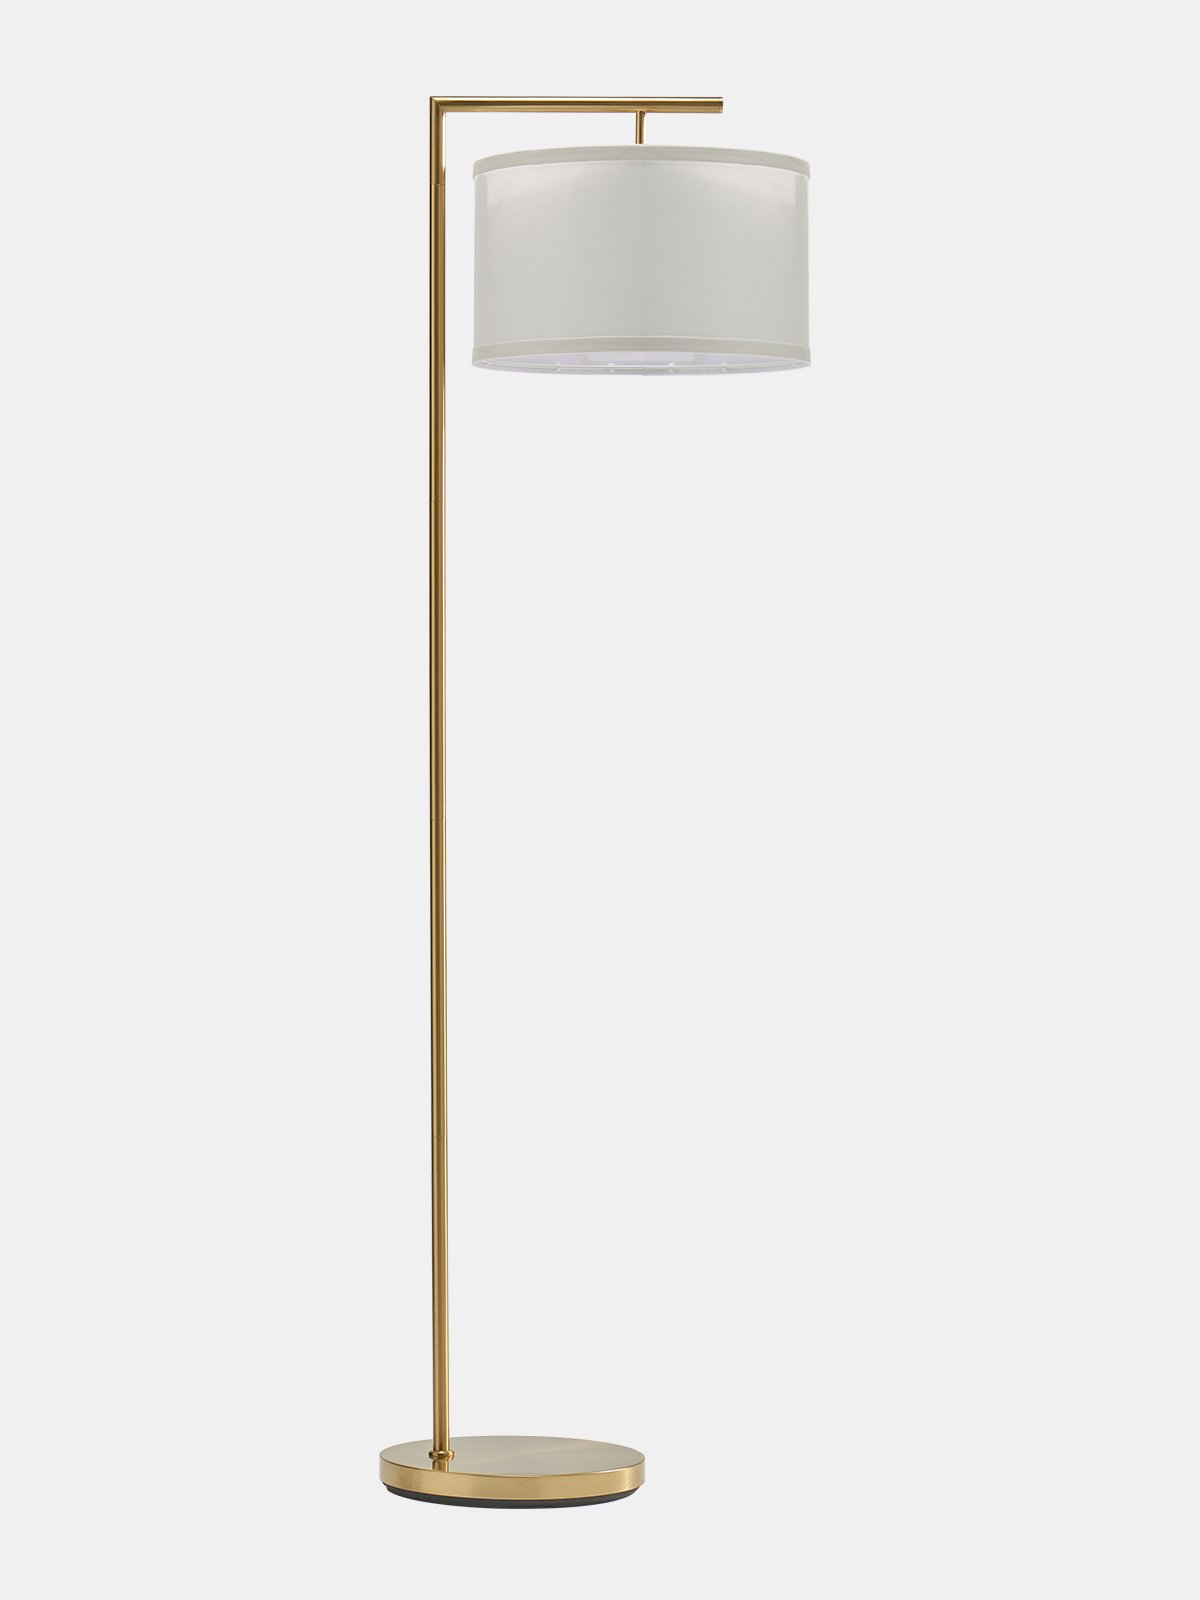 Satin Nickel Office LED Floor Lamp for Living Room- Standing Accent Light for Bedrooms Tall Pole Lamp with Hanging Drum Shade Brightech Montage Modern 